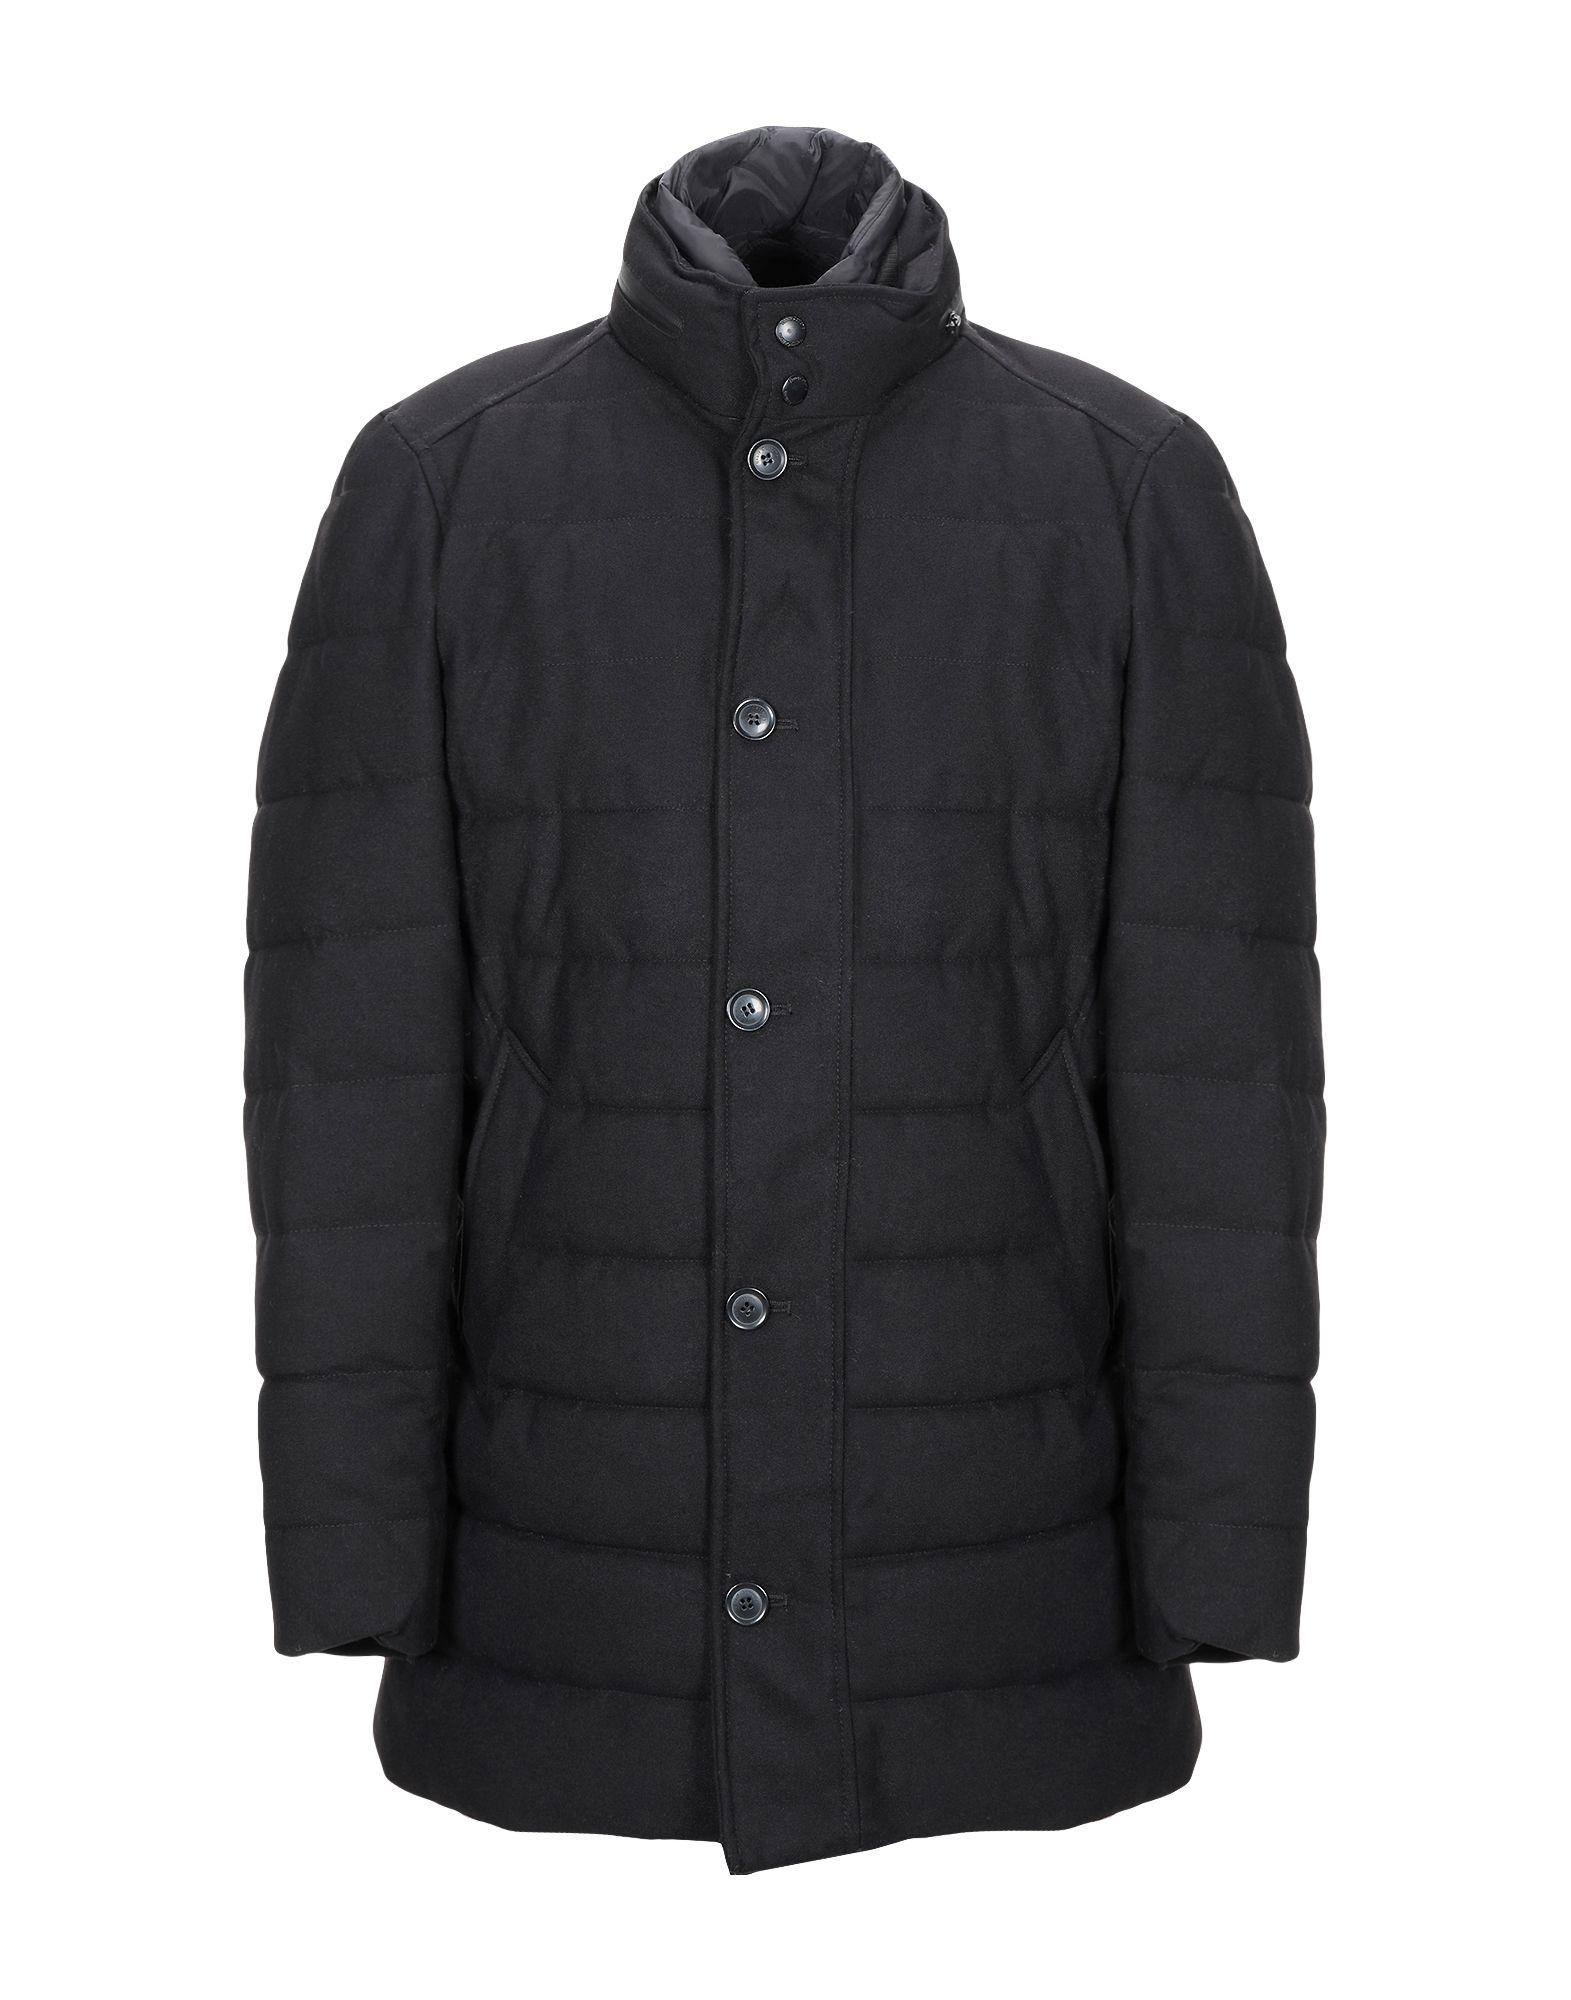 Henry Cotton's Synthetic Jacket in Black for Men - Lyst